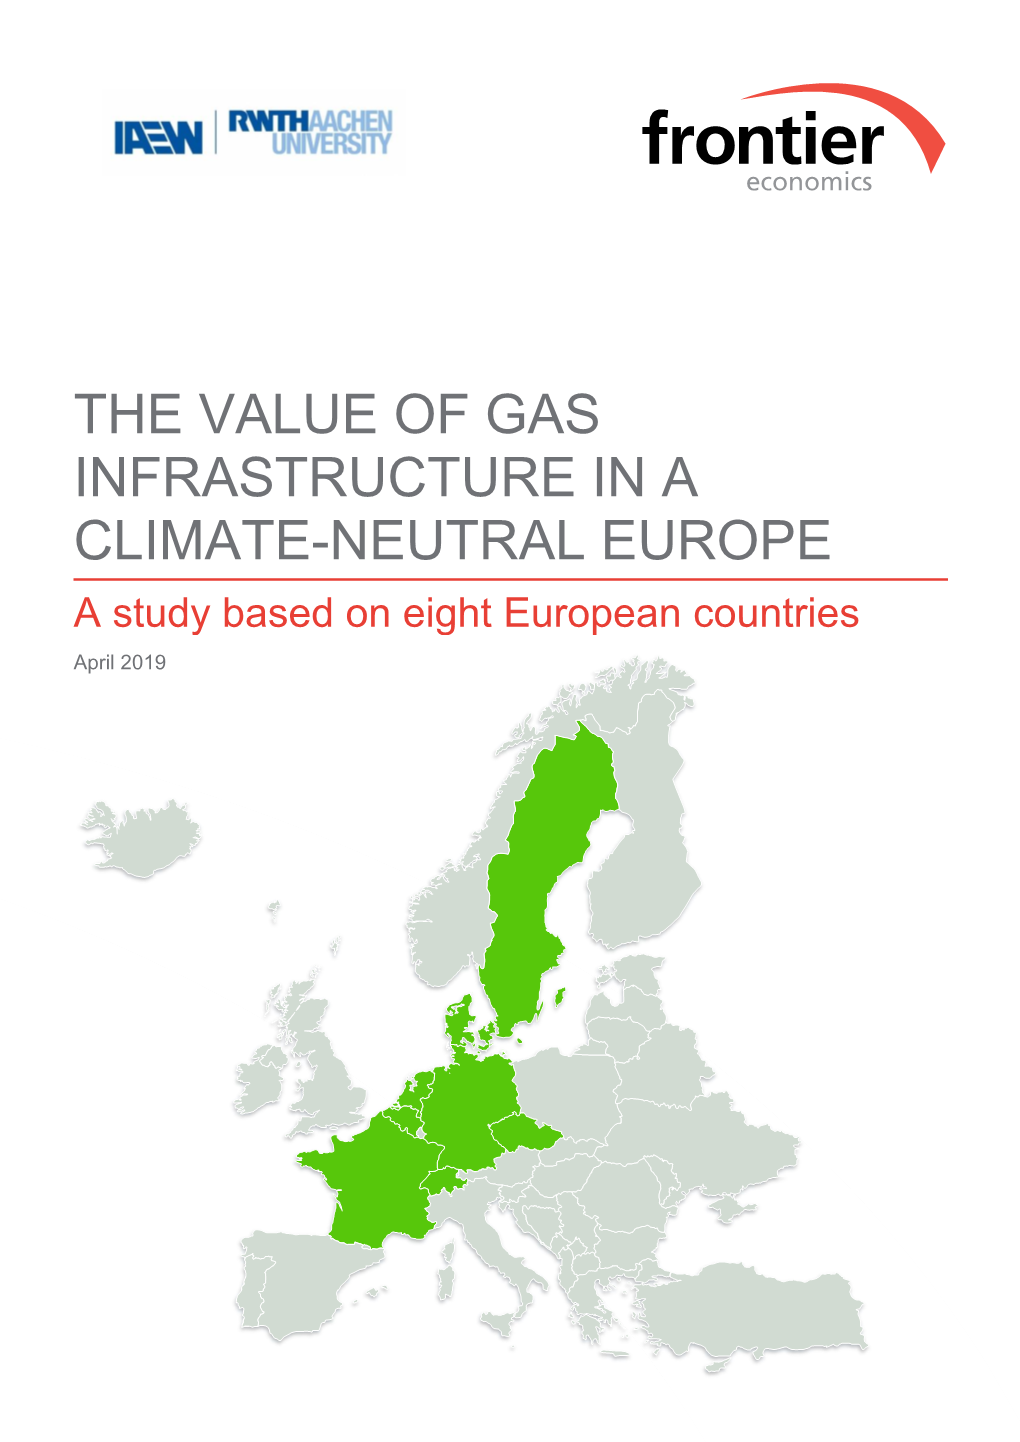 The Value of Gas Infrastructure in a Climate Neutral Europe